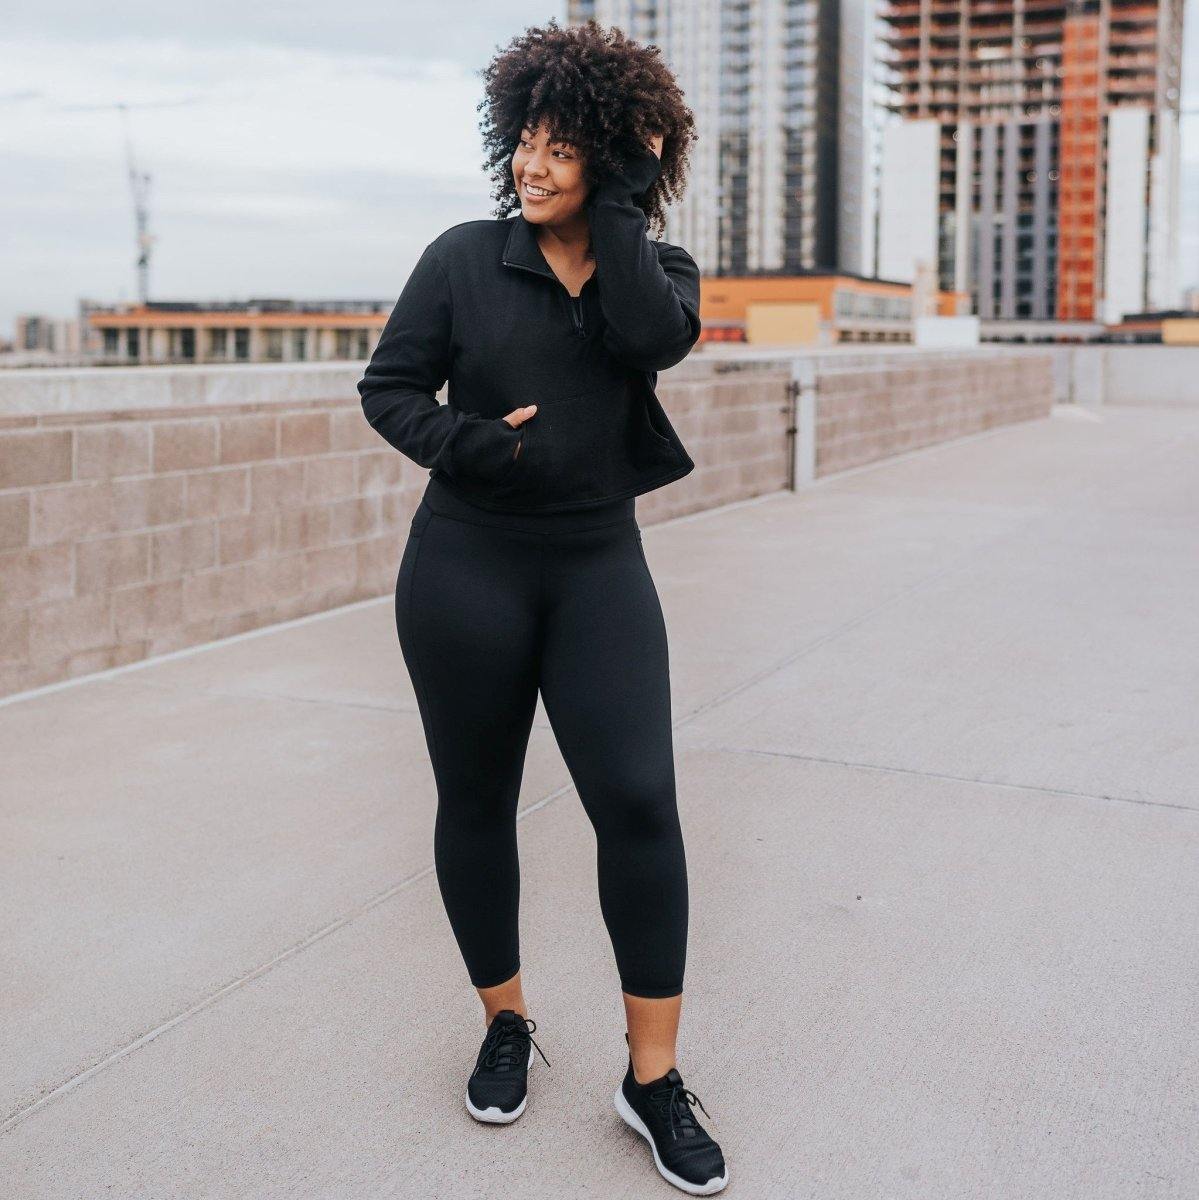 Senita Athletics - Our pick for Outfit of the Week is The Harmony Crop  Top - Black with the Tricolor Lux Leggings - Black, Jungle, Mint! ✨ I  mean c'mon! 😍 Name